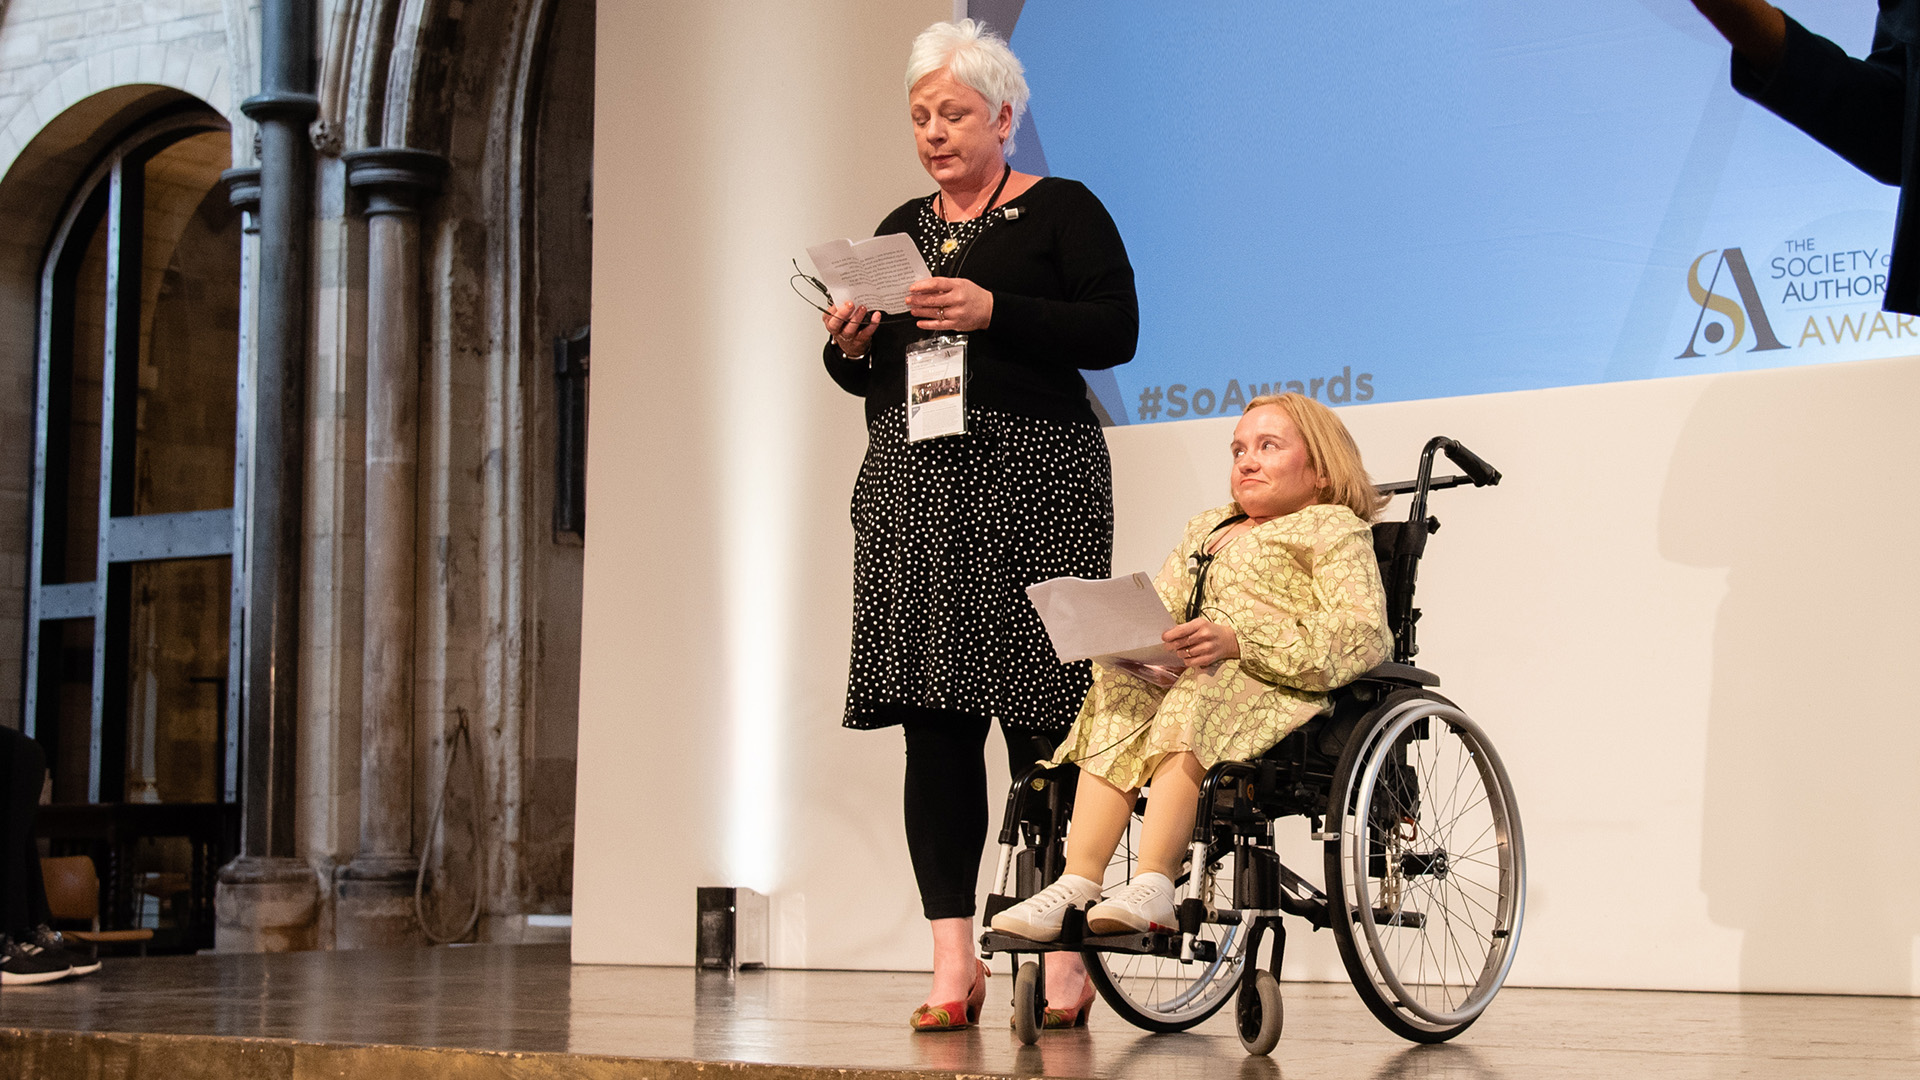 Announcing the new prize at Southwark Cathedral. From left, Clare Christian and Penny Batchelor (photograph © Adrian Pope)